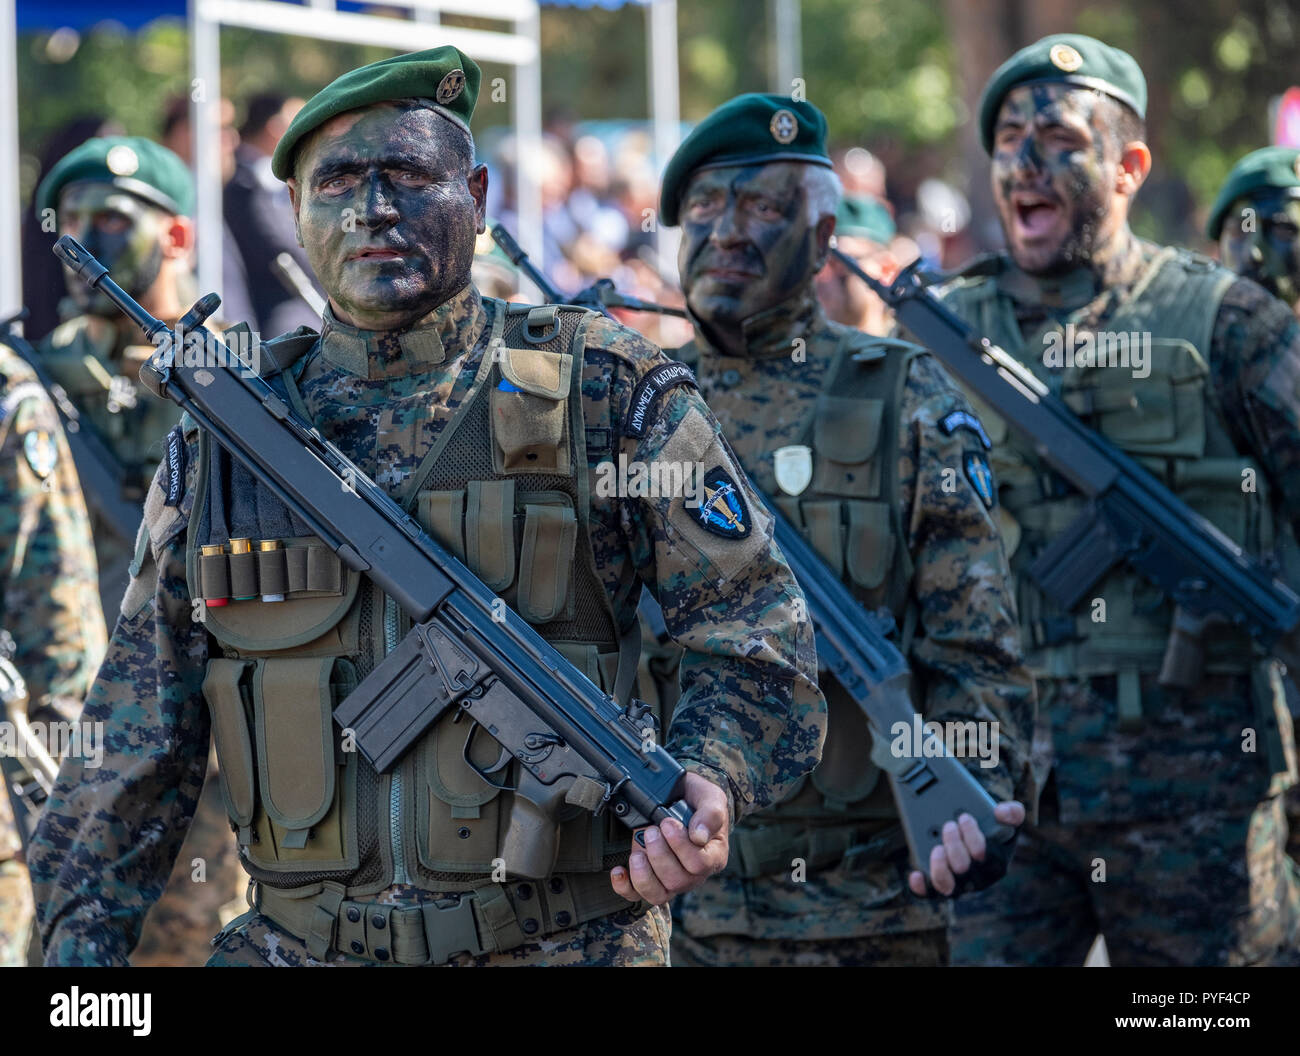 28/10/18: Cyprus: Cypriot soldiers on parade to commemorate Ochi Day in Paphos  town centre, Cyprus. Stock Photo